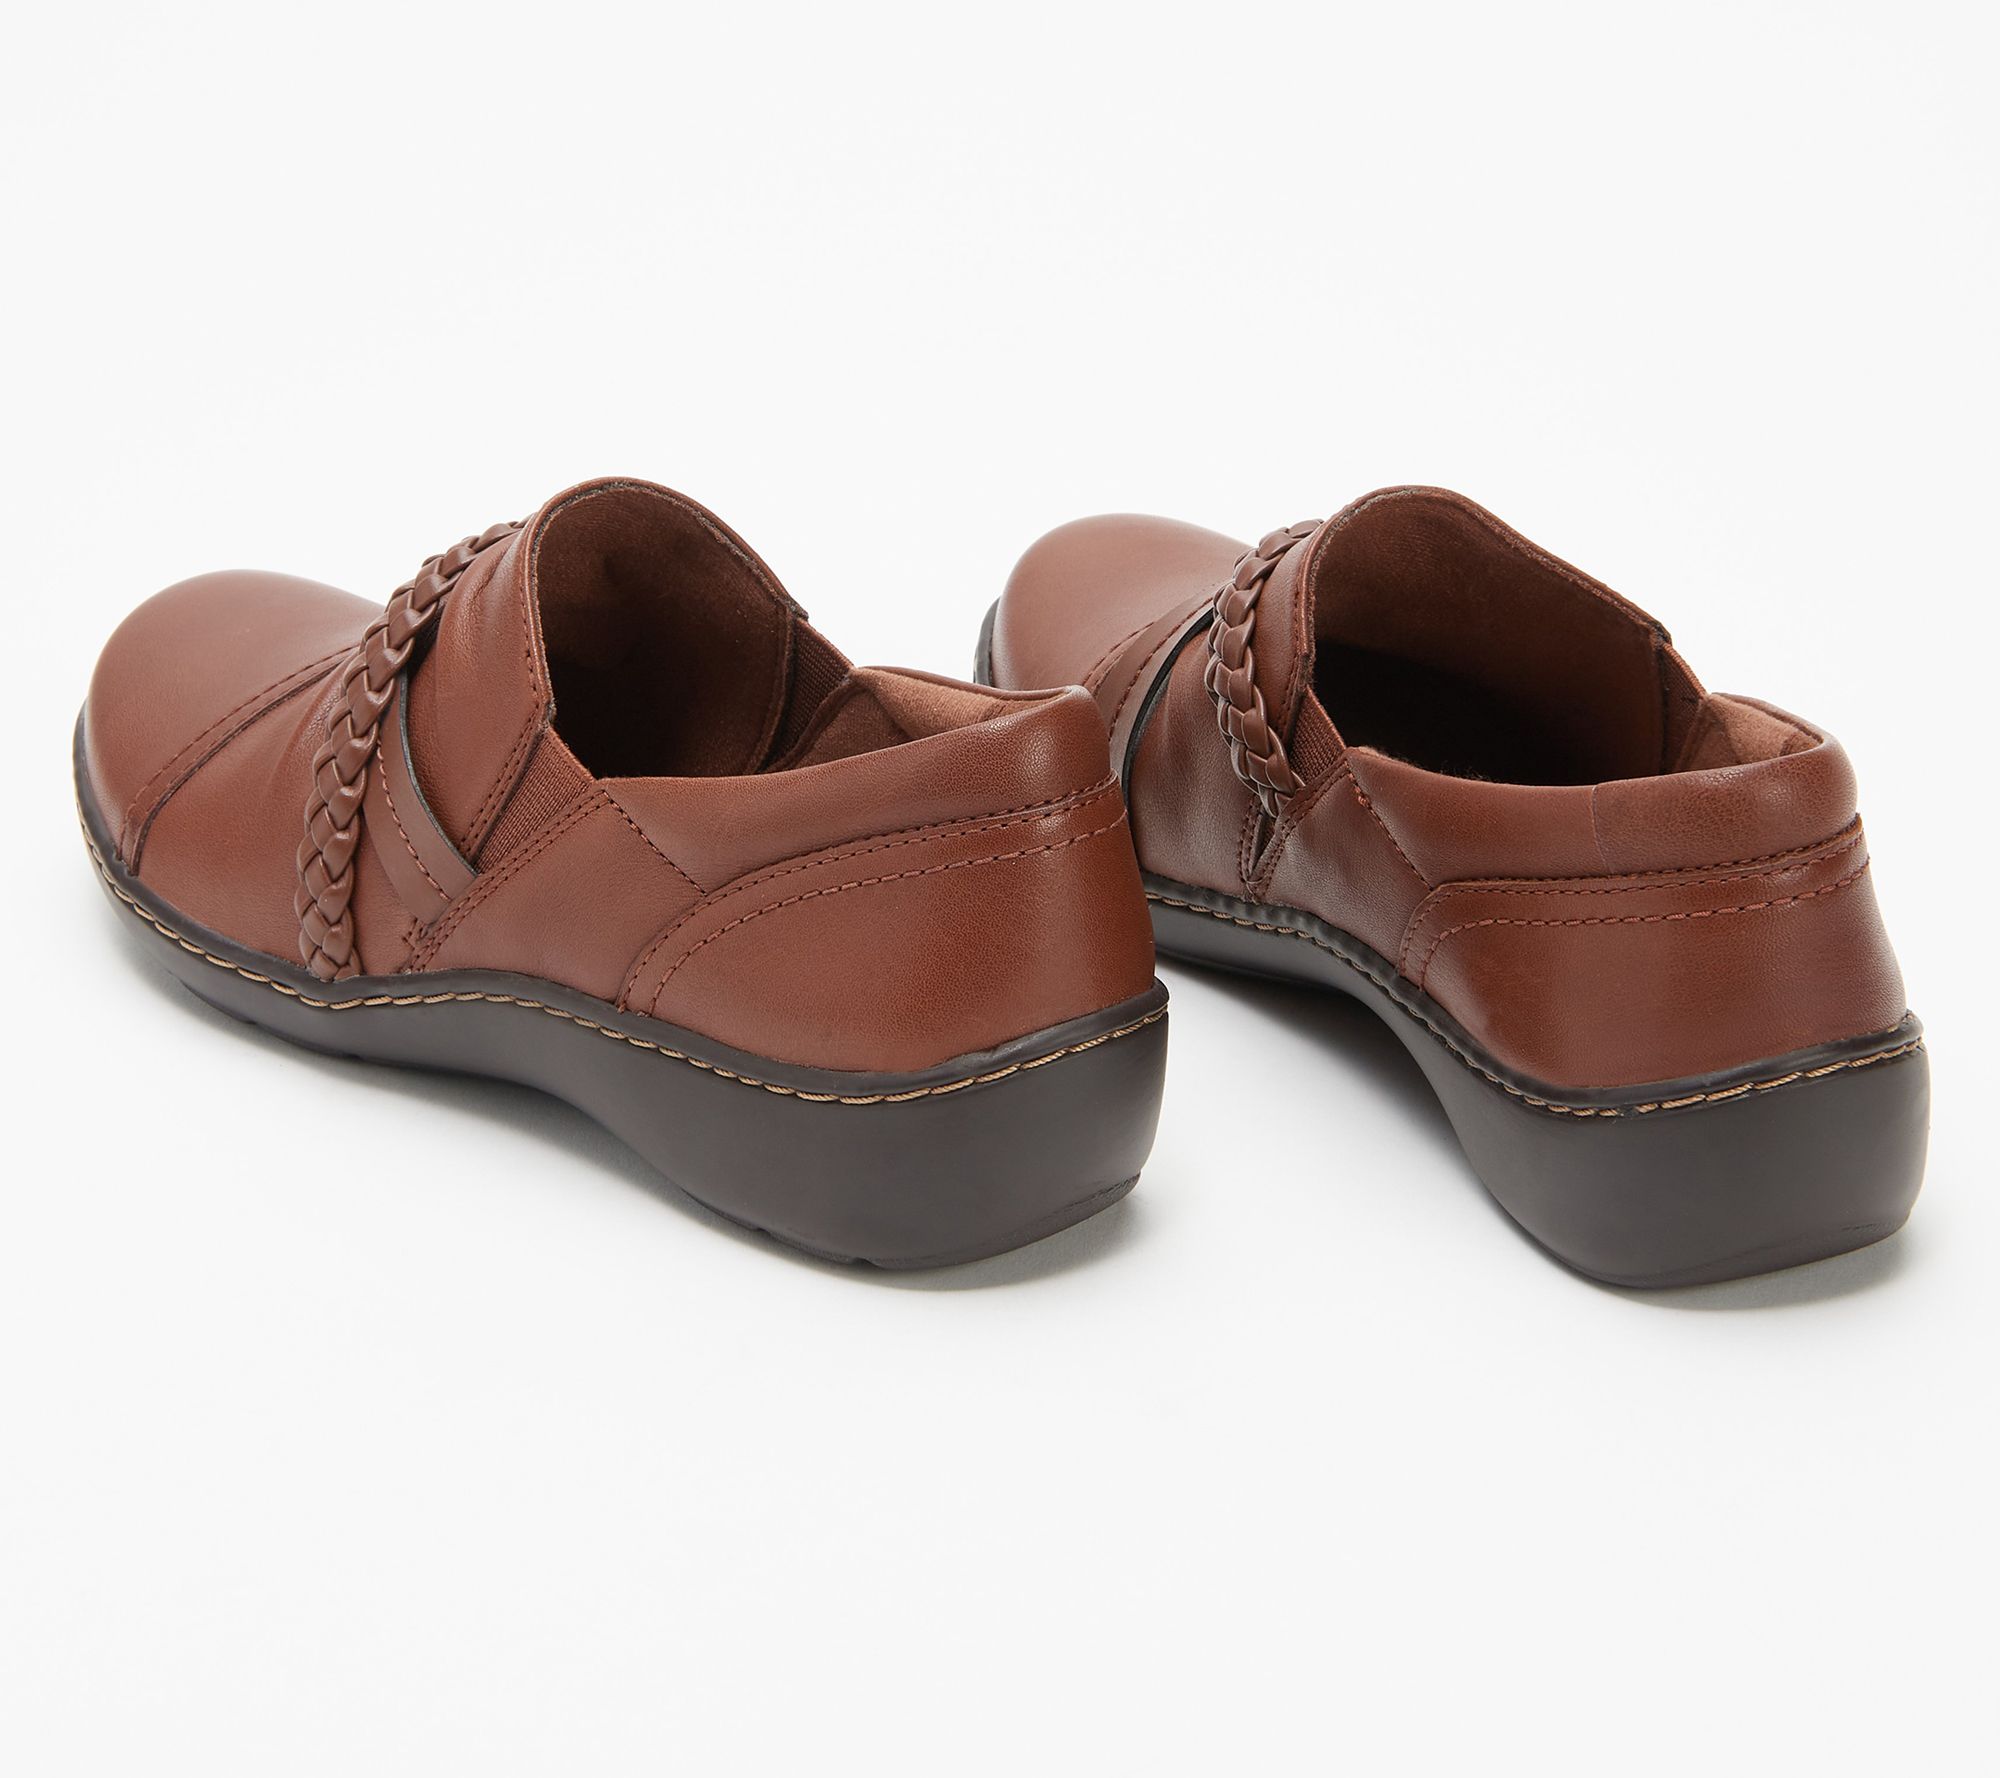 Qvc Clarks Shoes Today | lupon.gov.ph